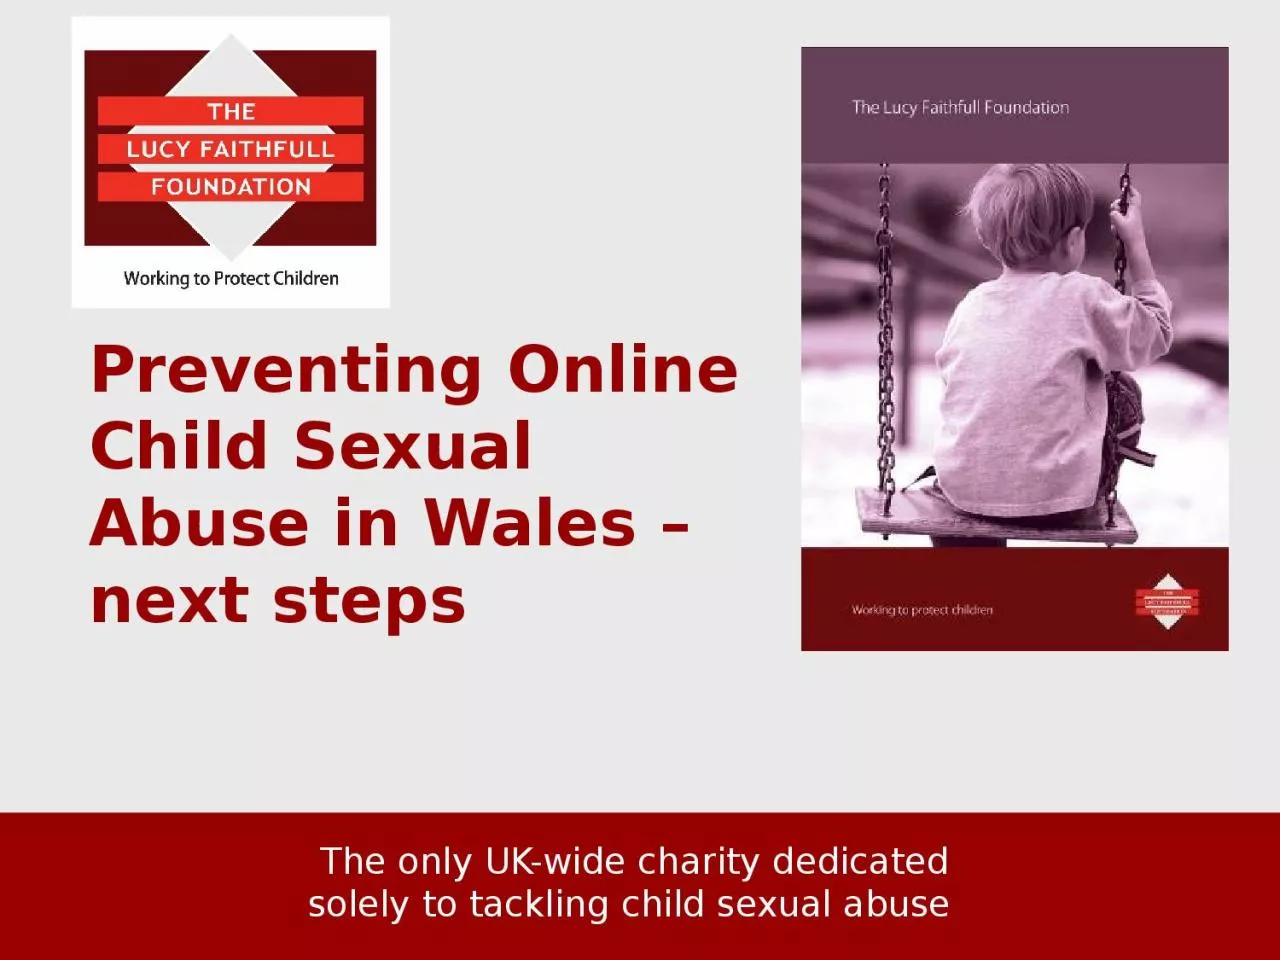 The only UK-wide charity dedicated solely to tackling child sexual abuse